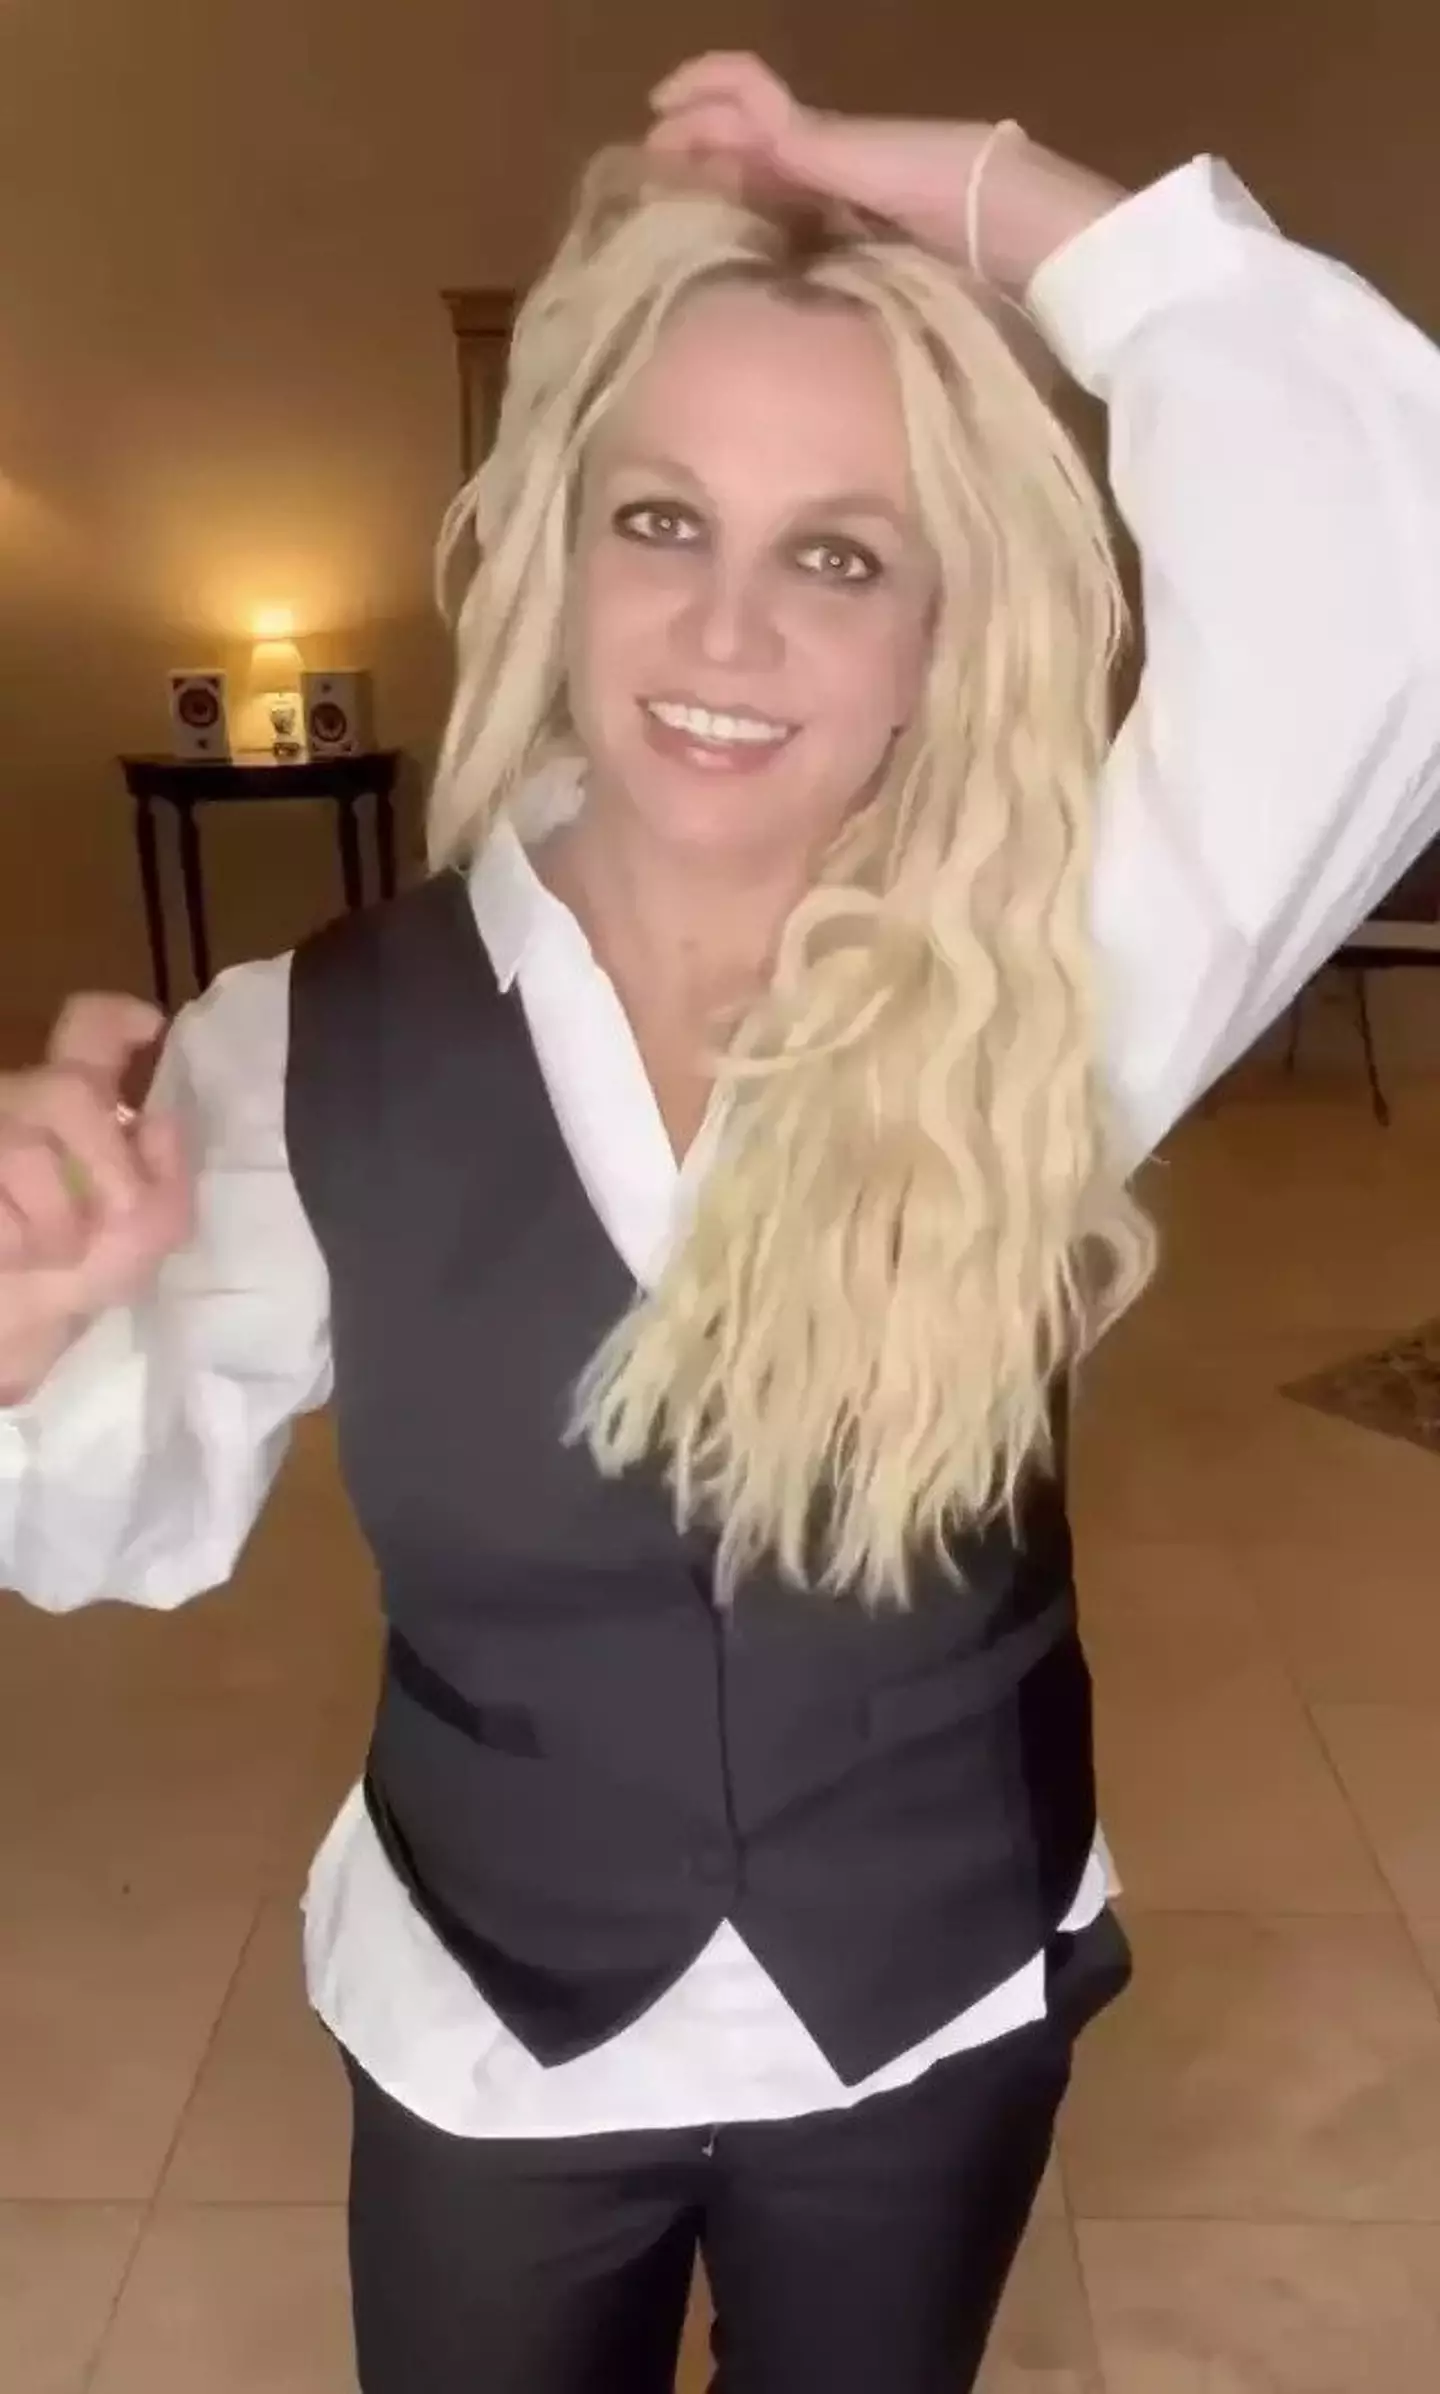 Britney Spears has flat out denied the claims.